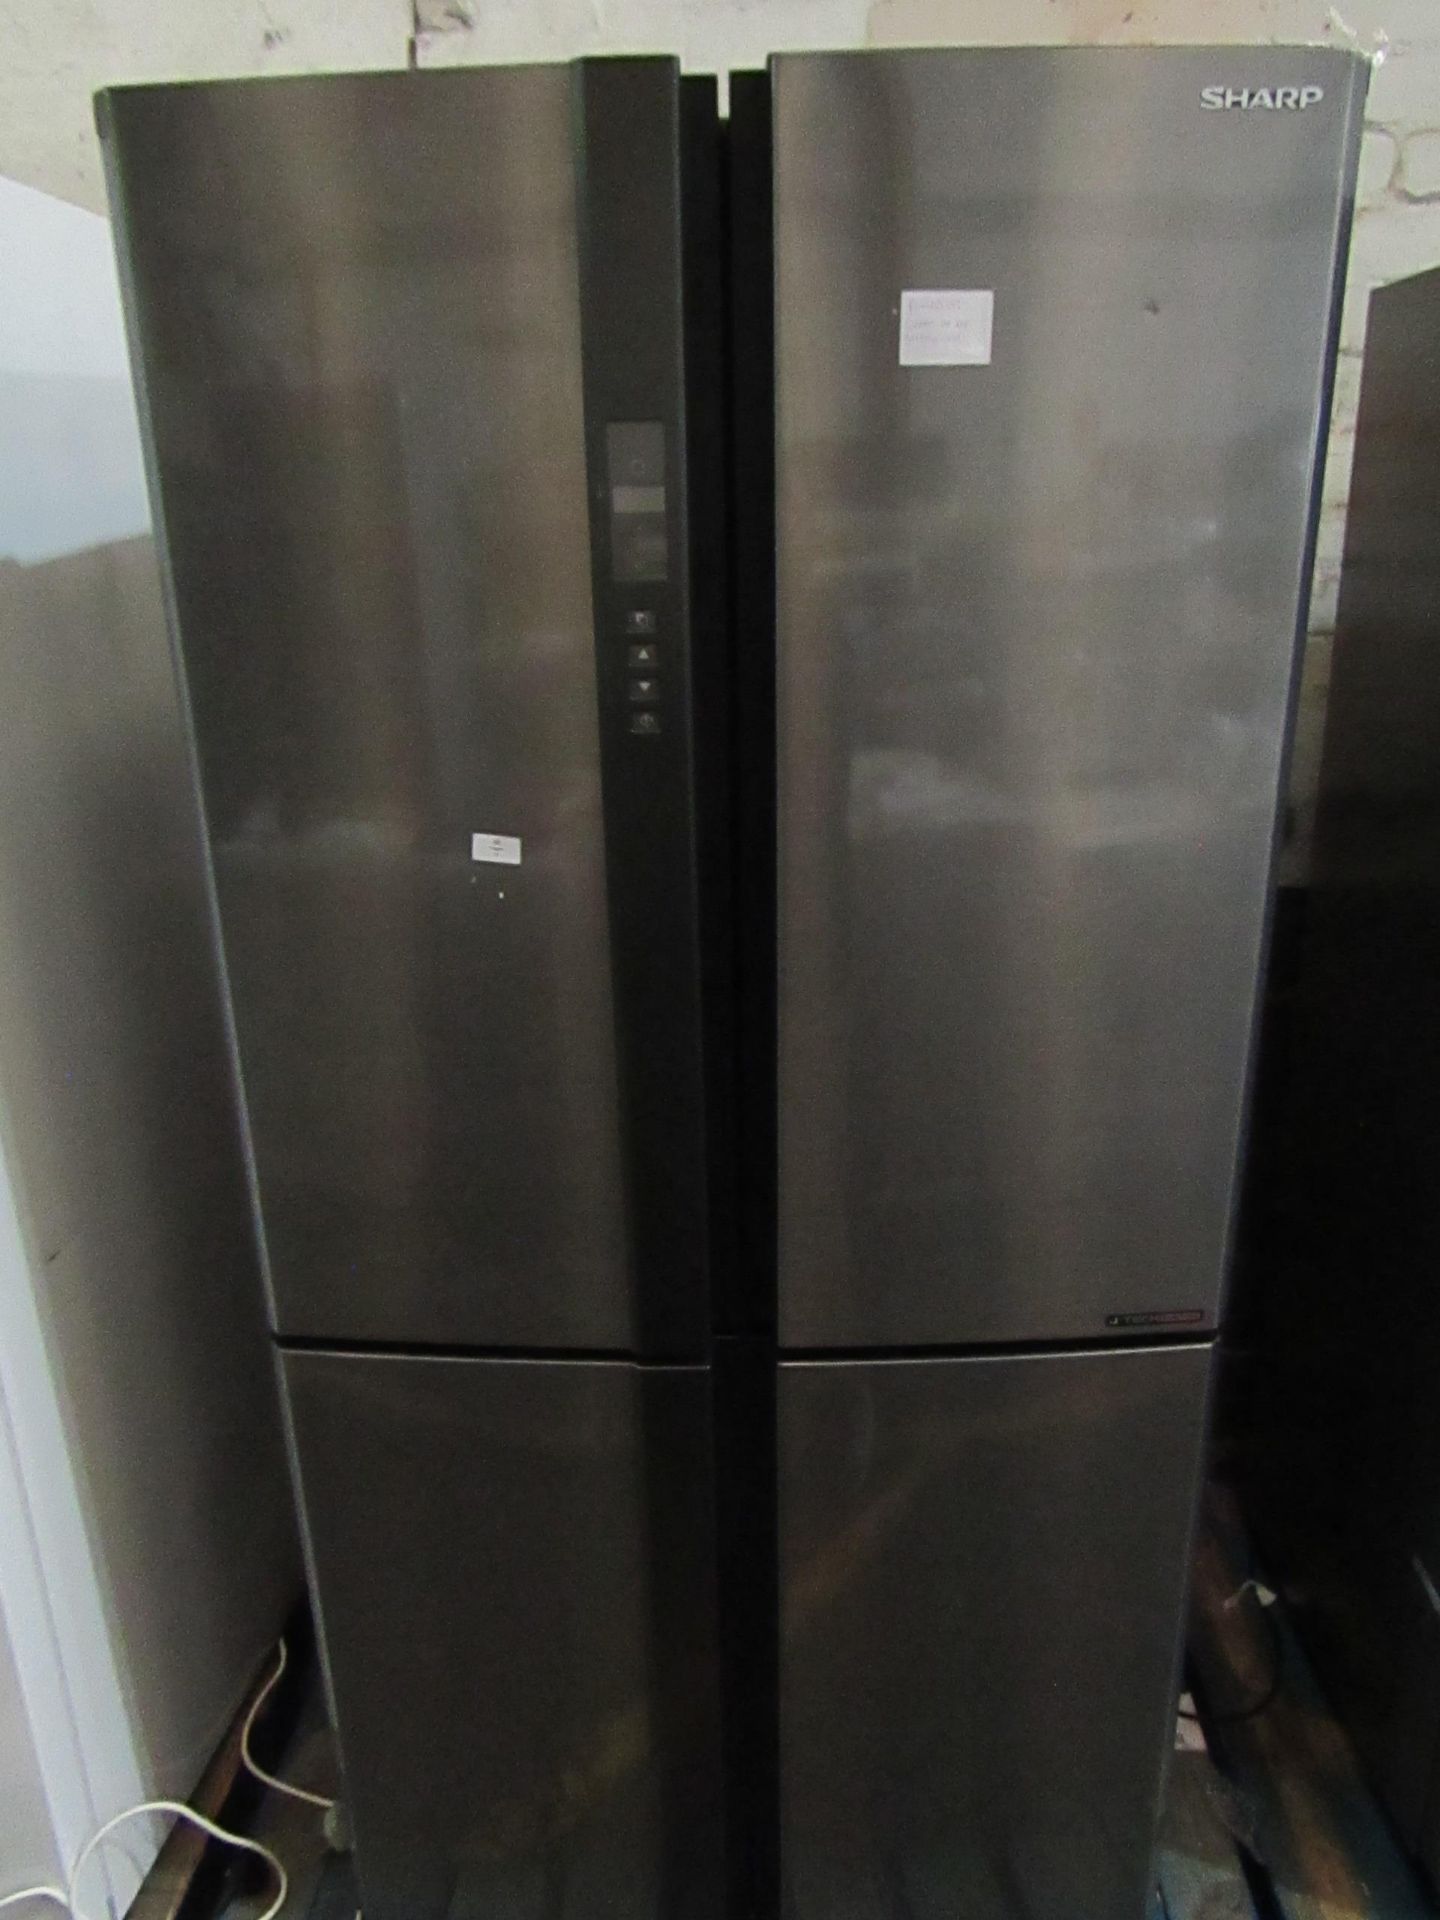 Sharp 4 door American fridge freezer, getting cold in both compartments when plugged in, has a - Image 5 of 5